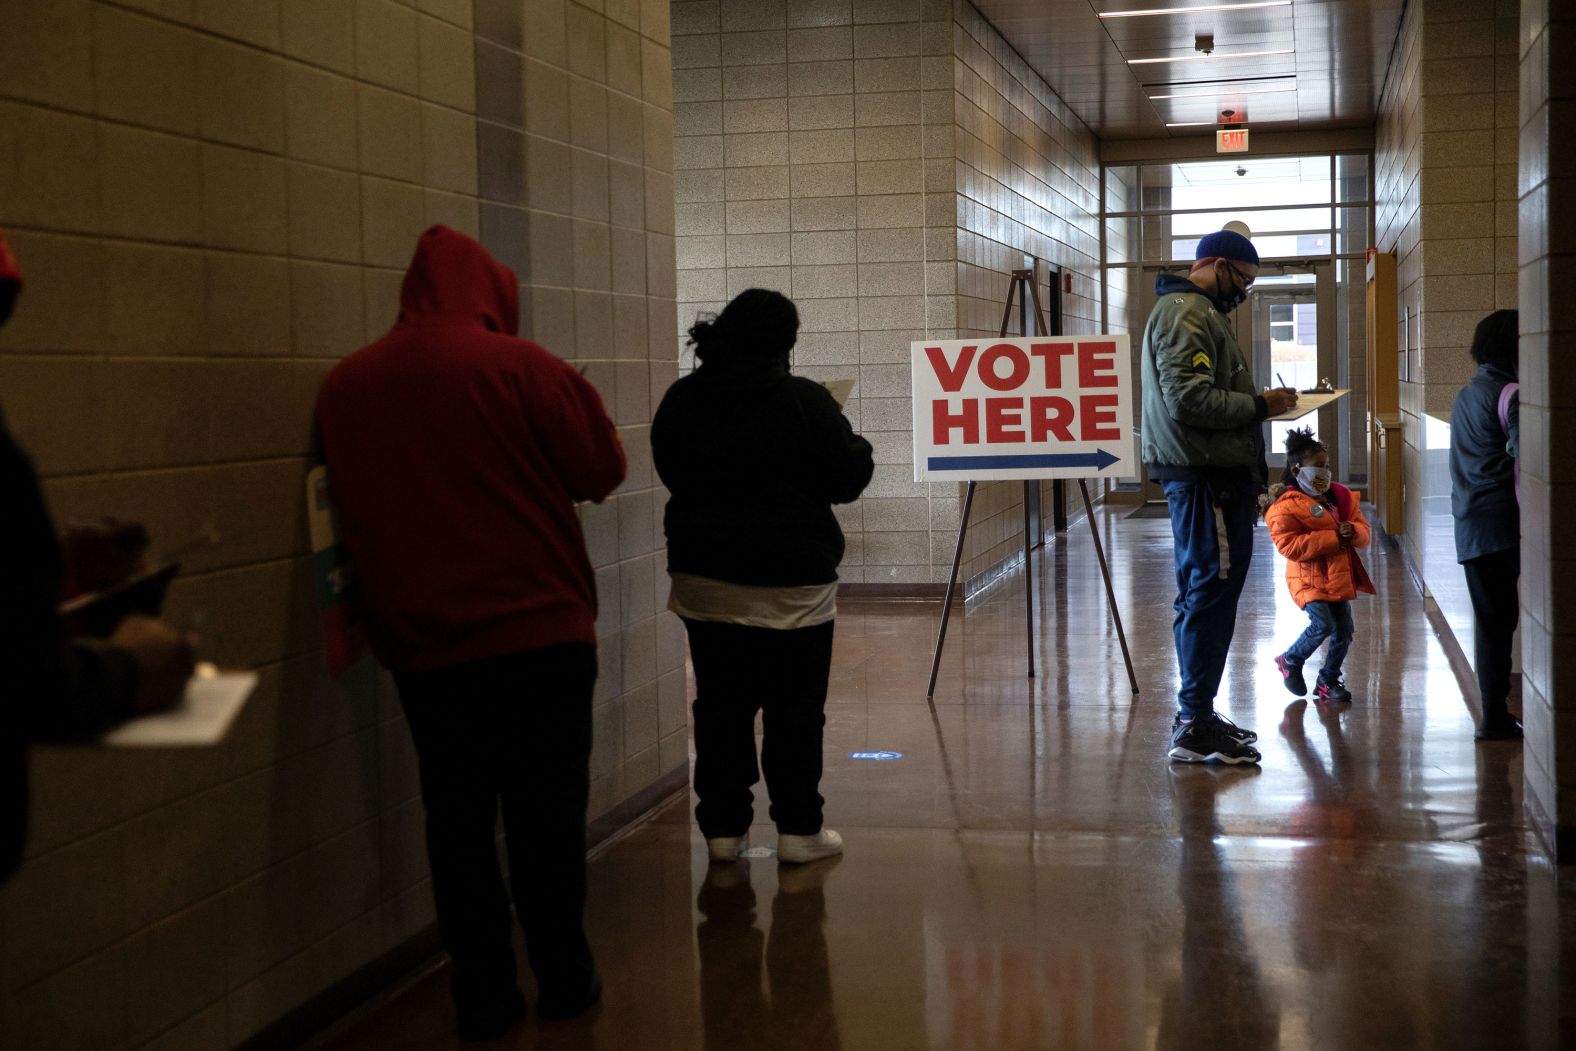 People stand in line to cast their ballots in Detroit on October 24.